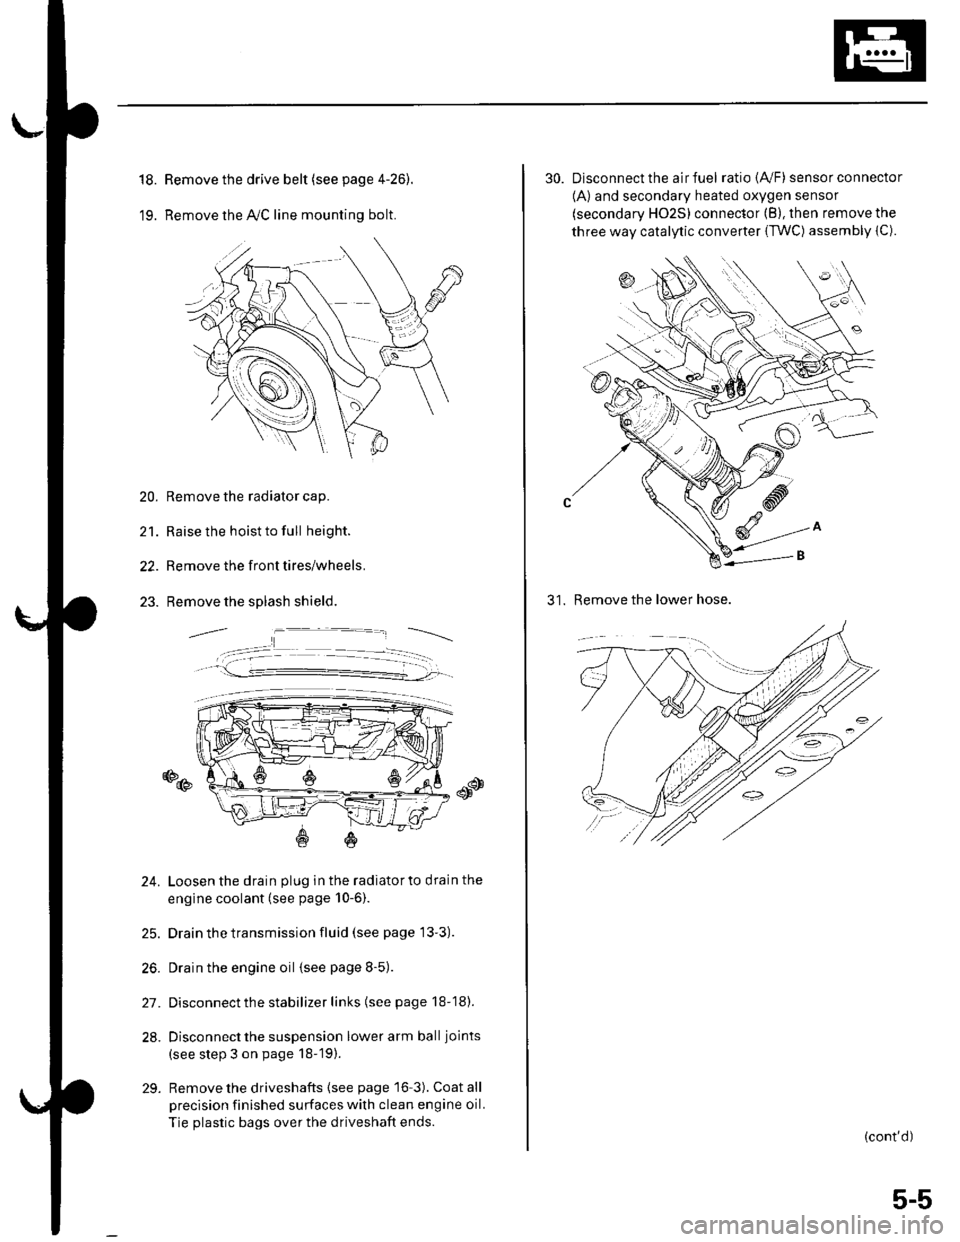 HONDA CIVIC 2003 7.G Workshop Manual 18.
19.
Remove the drive belt (see page 4-26).
Remove the lvC line mounting bolt.
20. Remove the radiator cap.
21. Raise the hoist to full height.
22. Remove the front tires/wheels.
23. Remove the spl